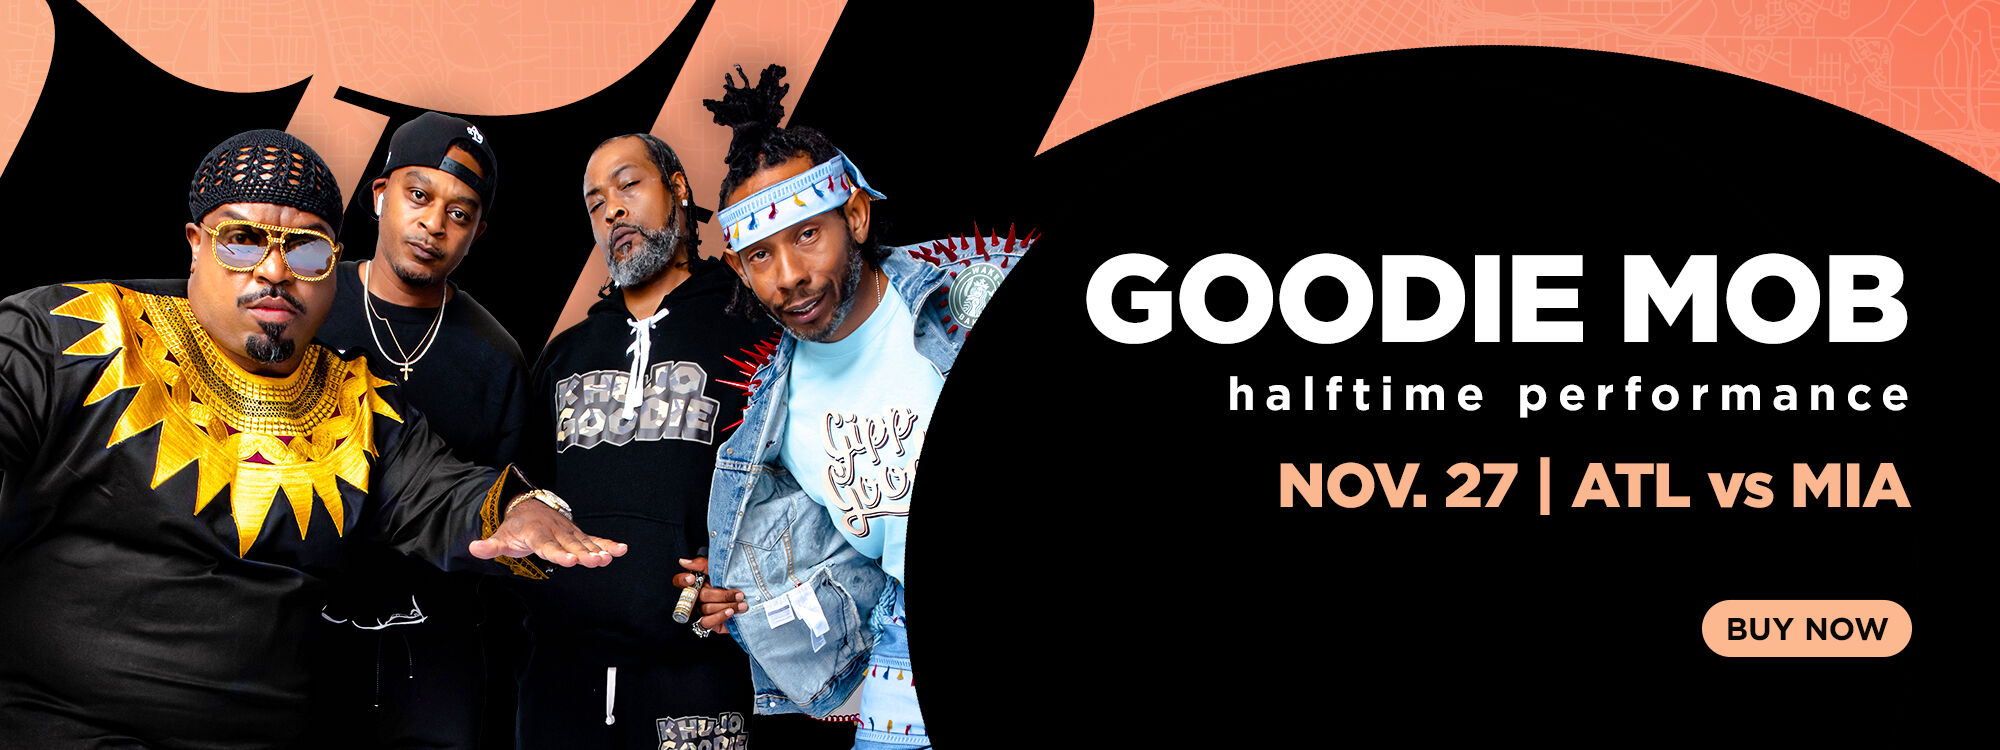 Goodie Mob to perform at Sunday's Atlanta Hawks game | Sports